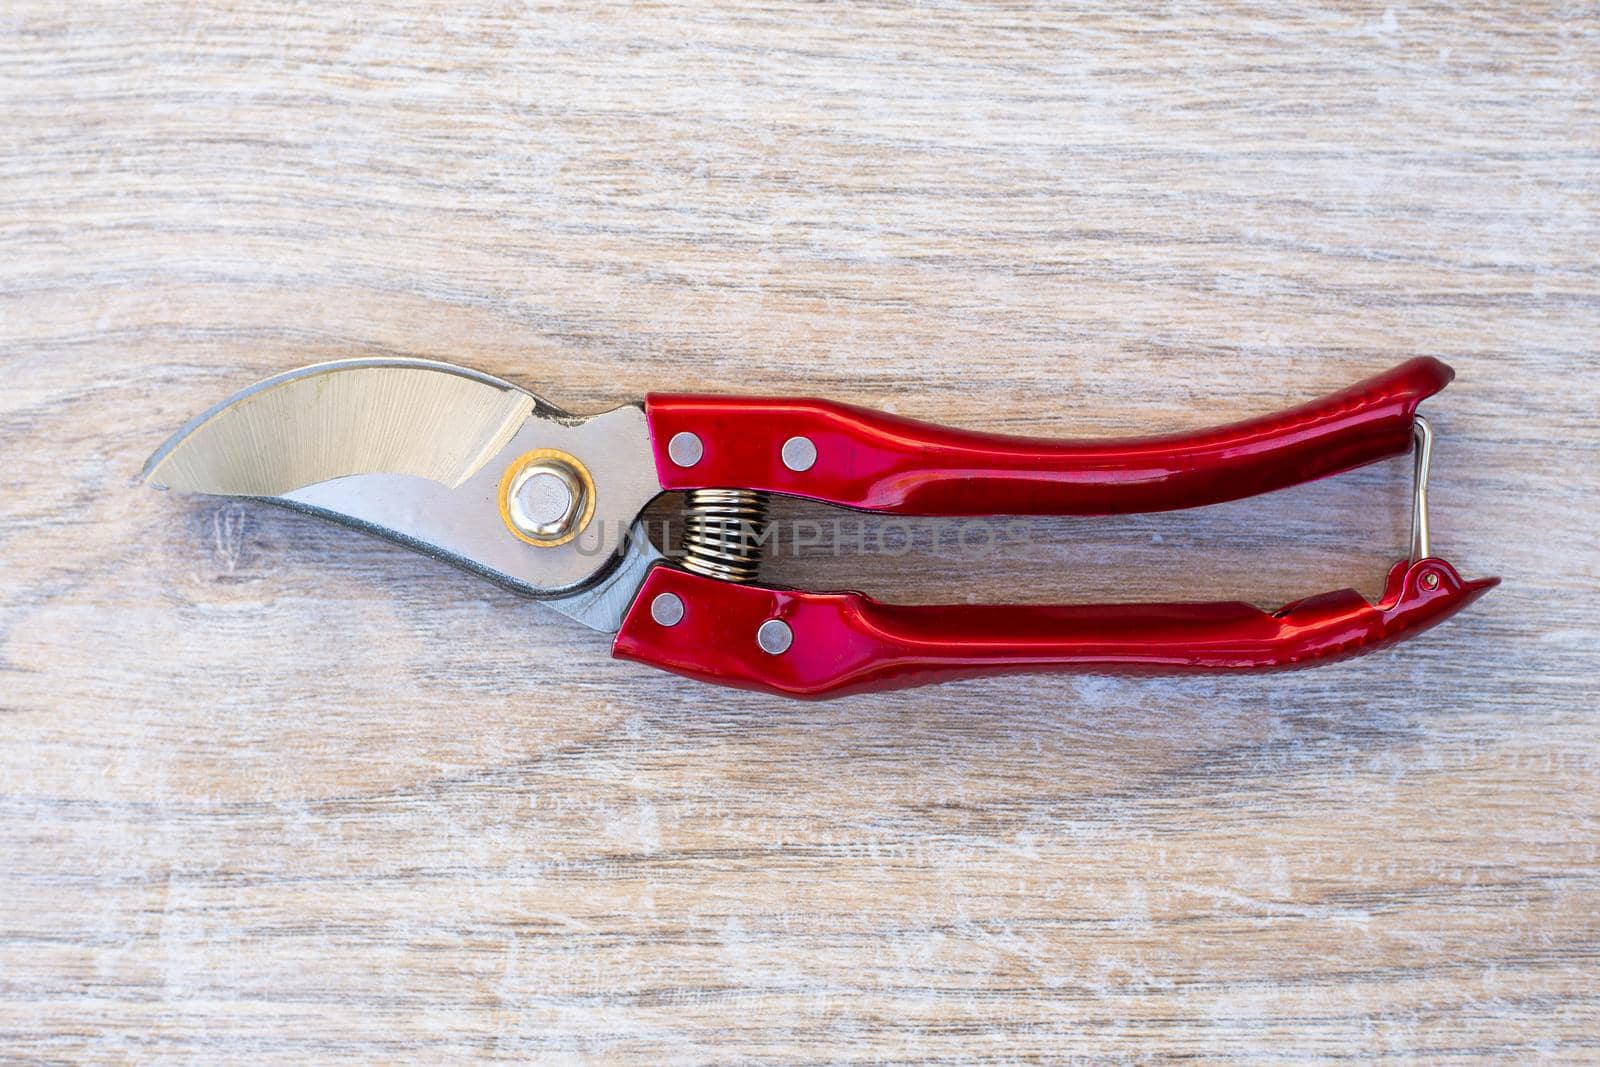 Garden shears pruner with red handles on a wooden background. Professional tool for plant care and pruning by levnat09